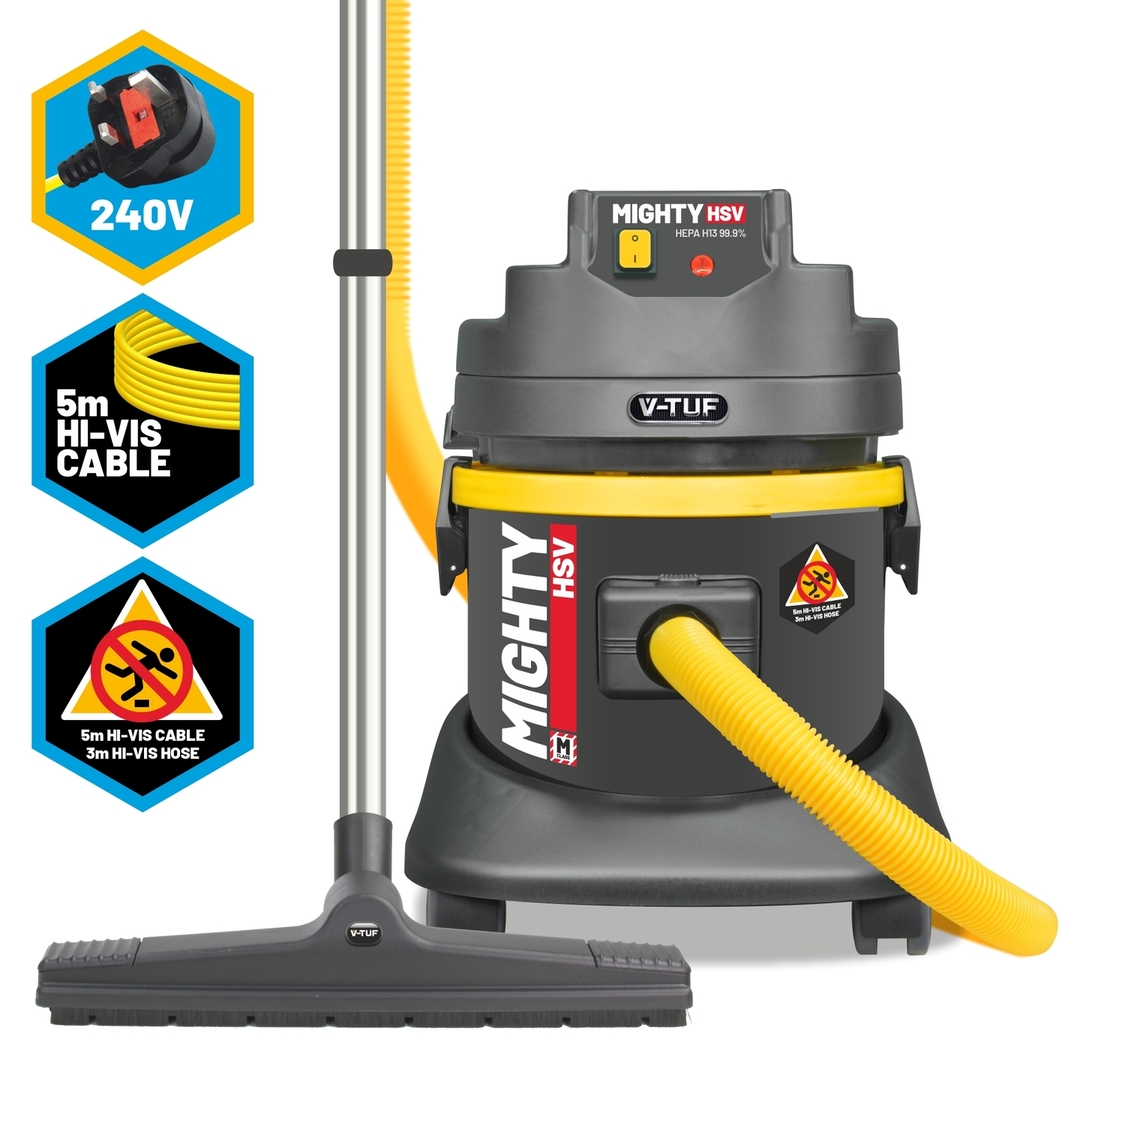 V-Tuf MIGHTY HSV - 21L M-Class 240v Industrial Dust Extraction Vacuum Cleaner - Health & Safety Version 